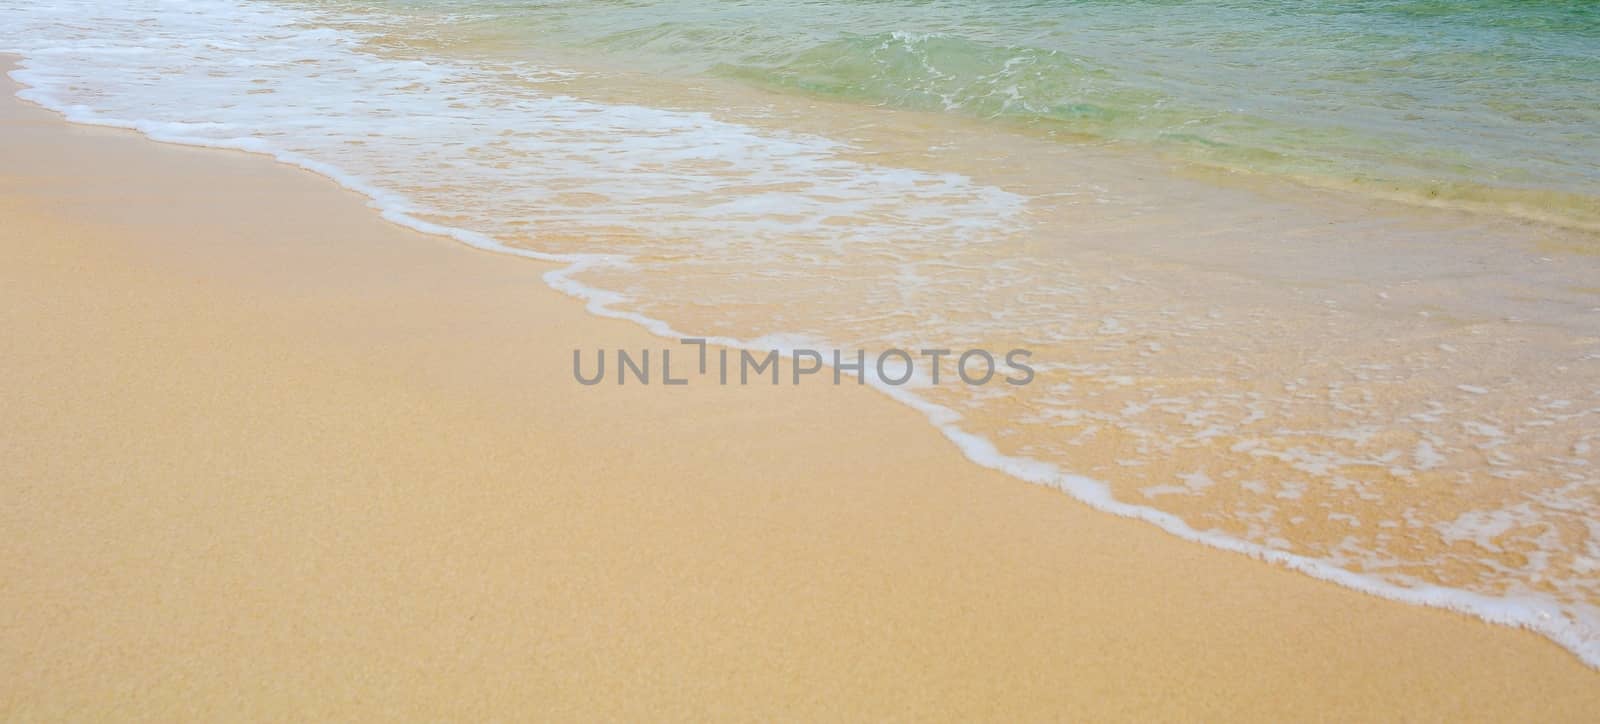 Closeup of a gold sand beach with turquoise ocean water with waves.